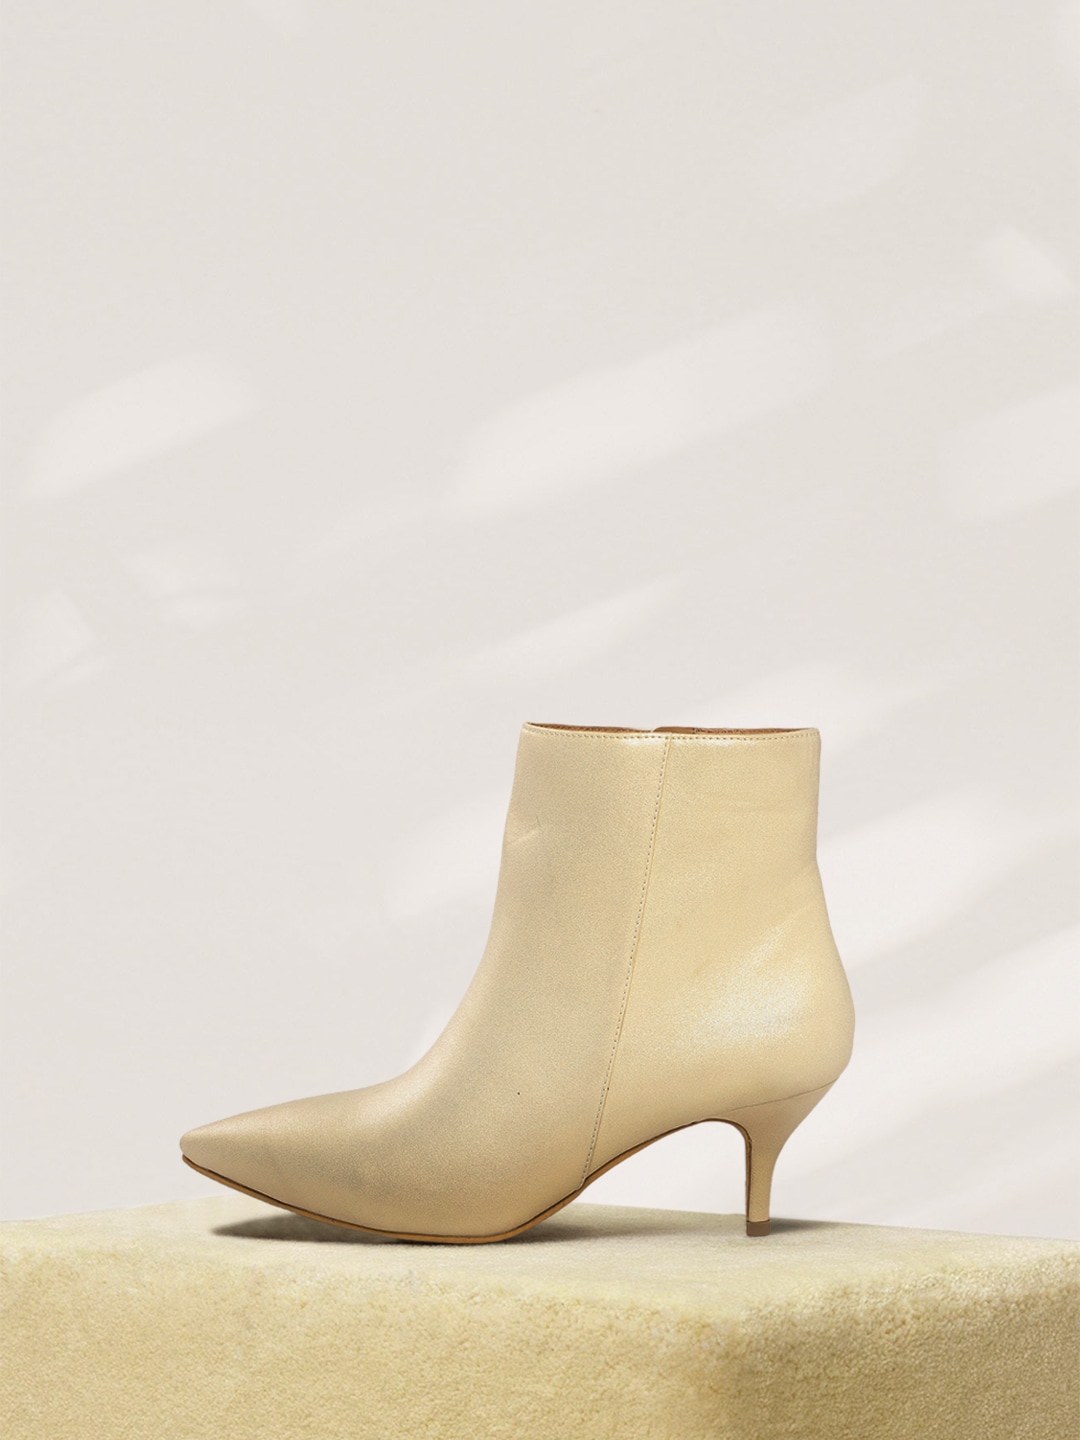 CORSICA Muted Gold-Toned Solid Mid-Top Kitten Heeled Boots Price in India